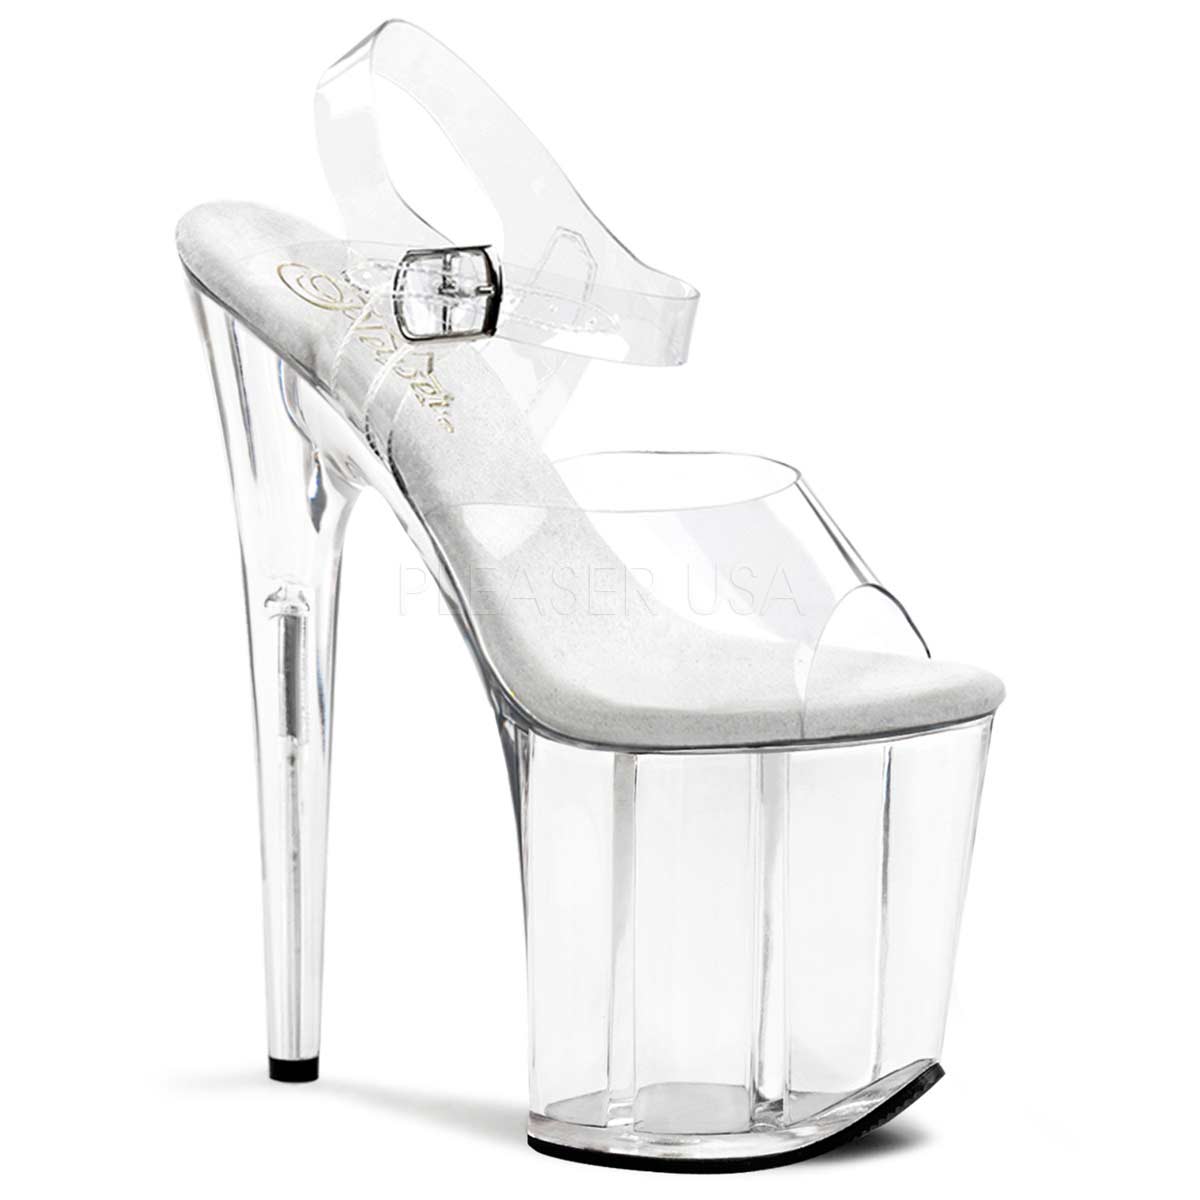 Pleaser Flamingo-808 - Clear on Clear in Sexy Heels & Platforms - $61.95